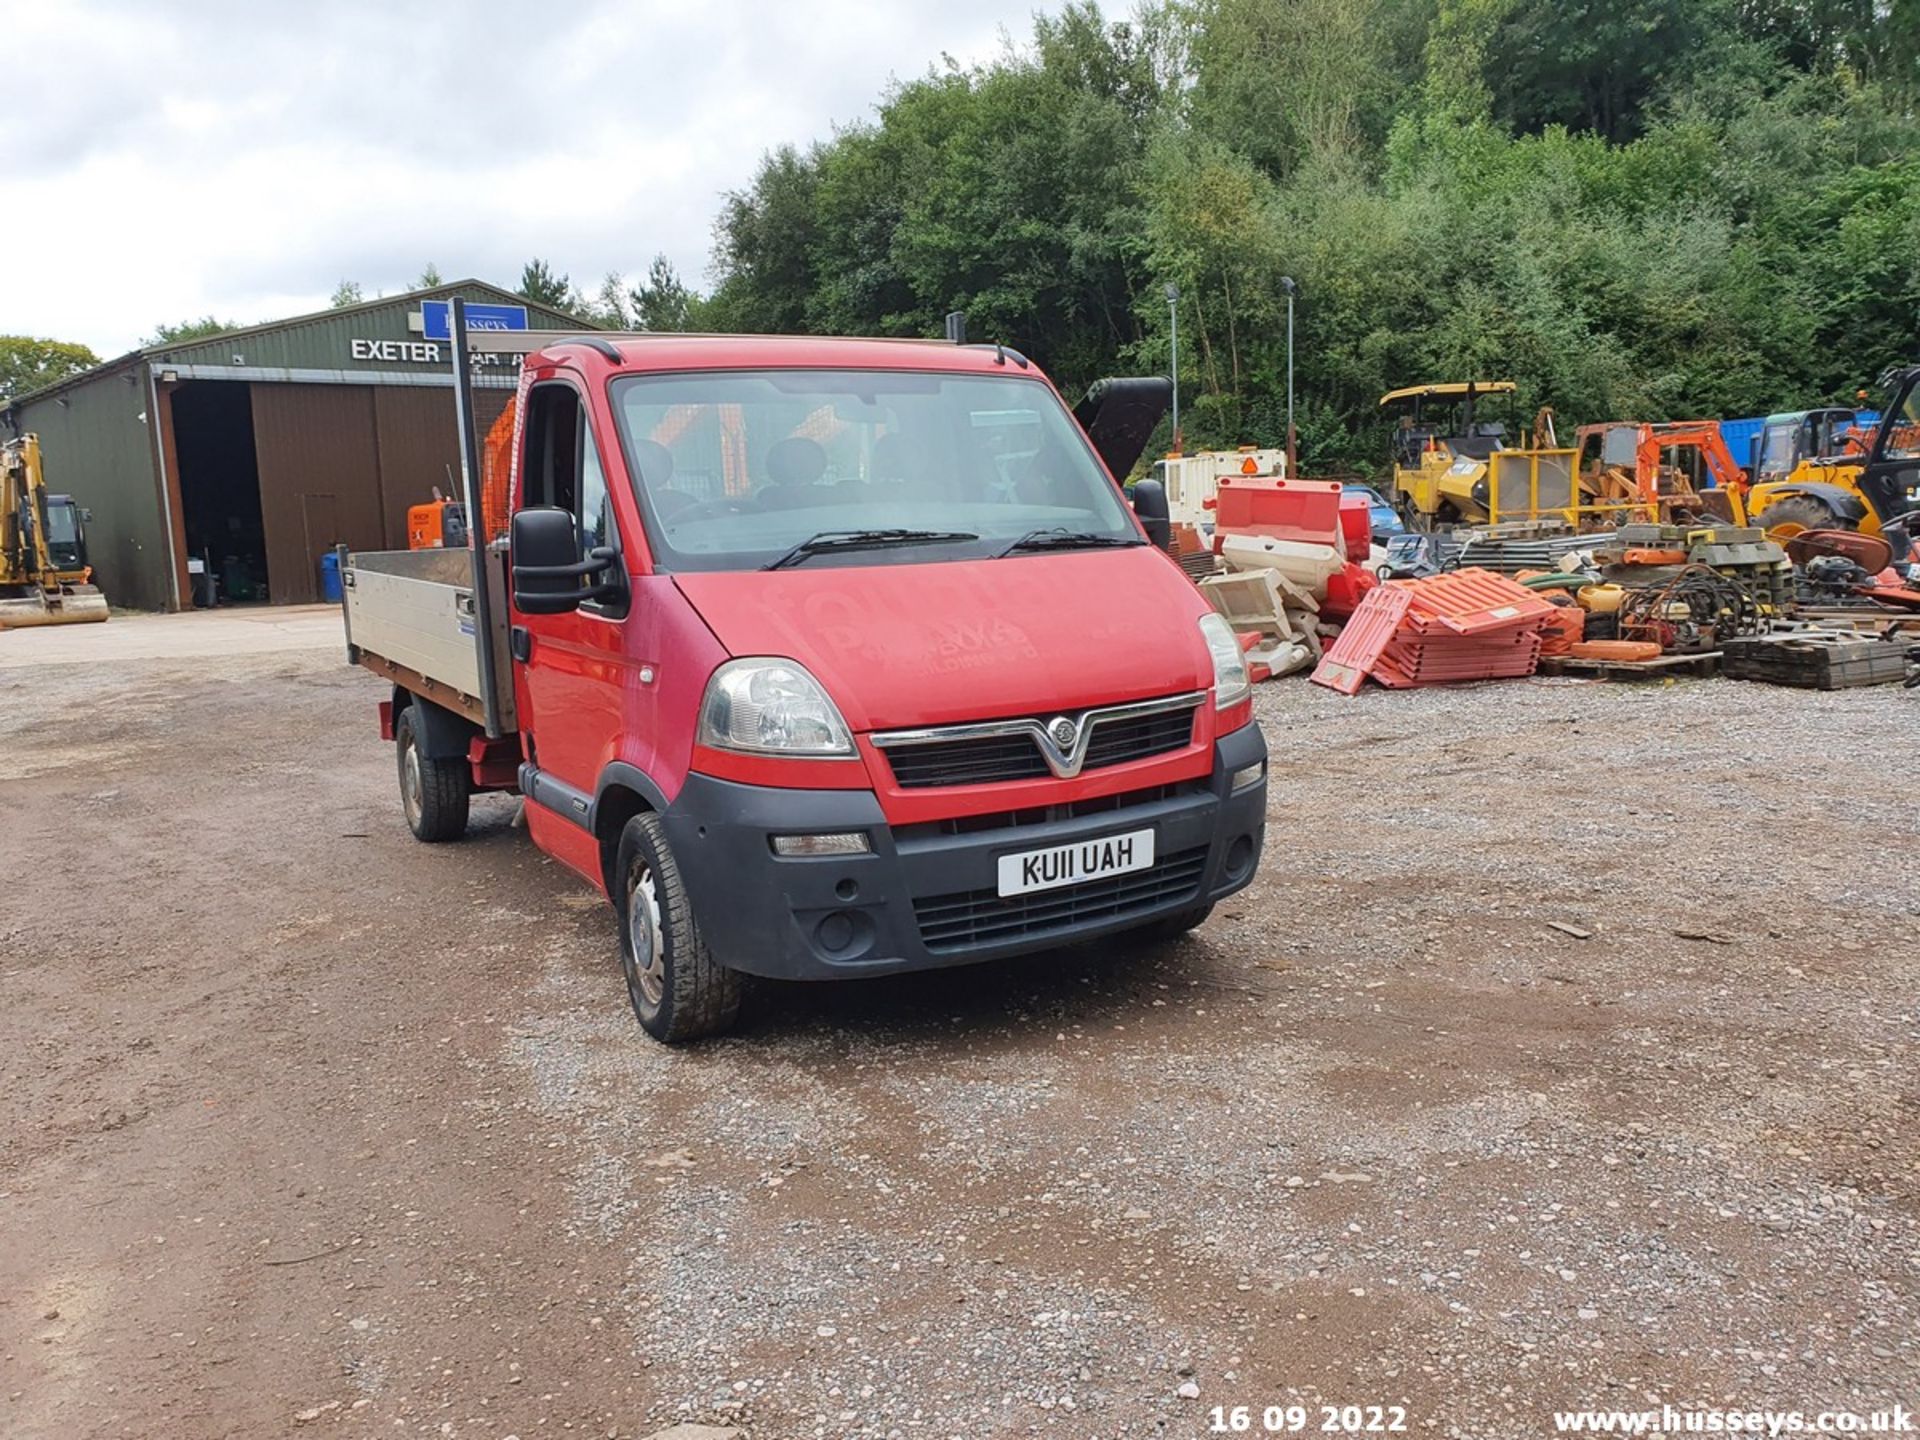 11/11 VAUXHALL MOVANO 3500 CDTI MWB - 2464cc 2dr Tipper (Red, 52k) - Image 7 of 44